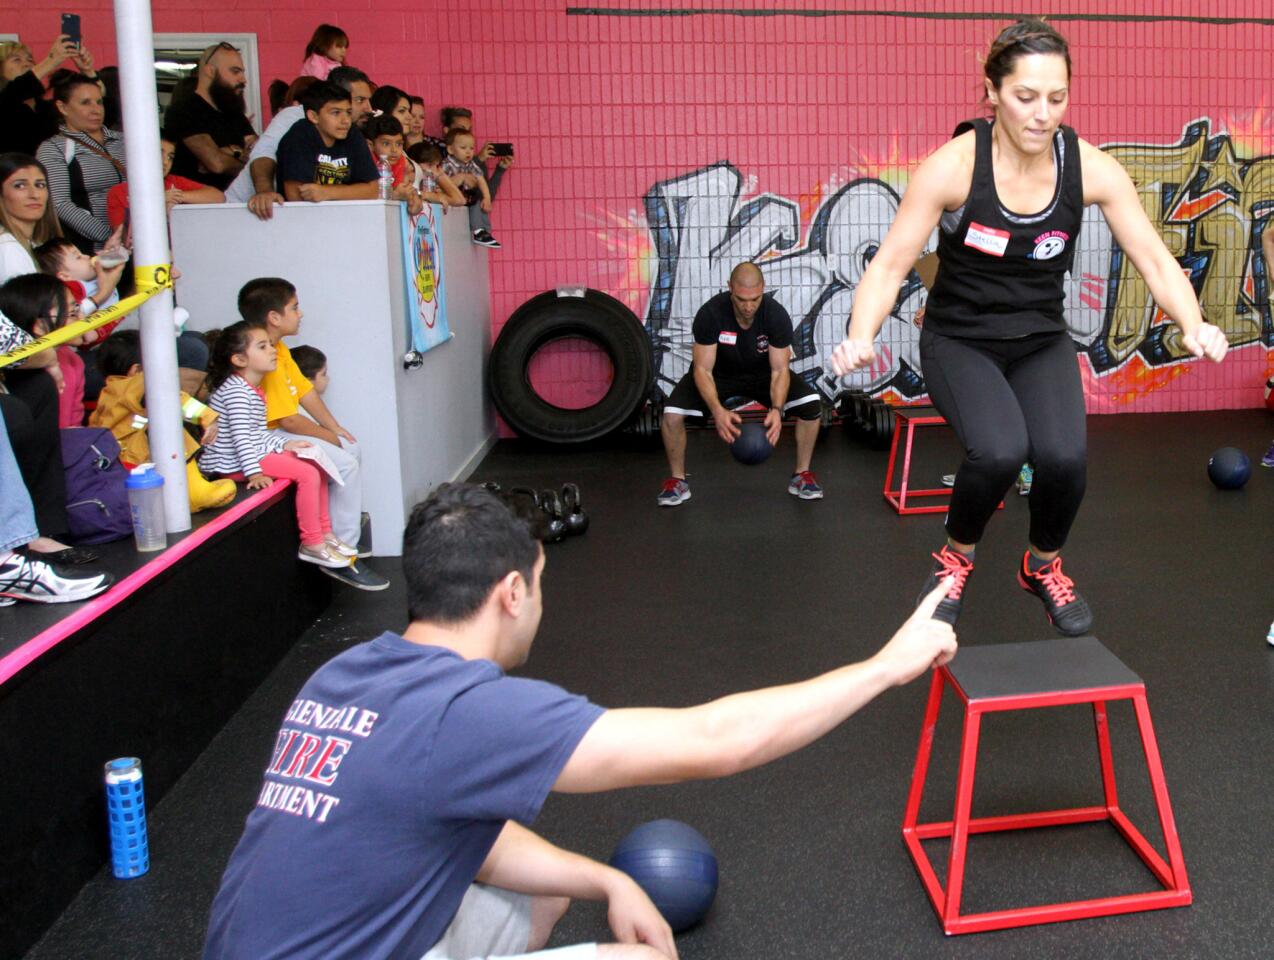 Photo Gallery: Glendale Fire Dept. and Keen Fitness team up for fundraising event in Montrose